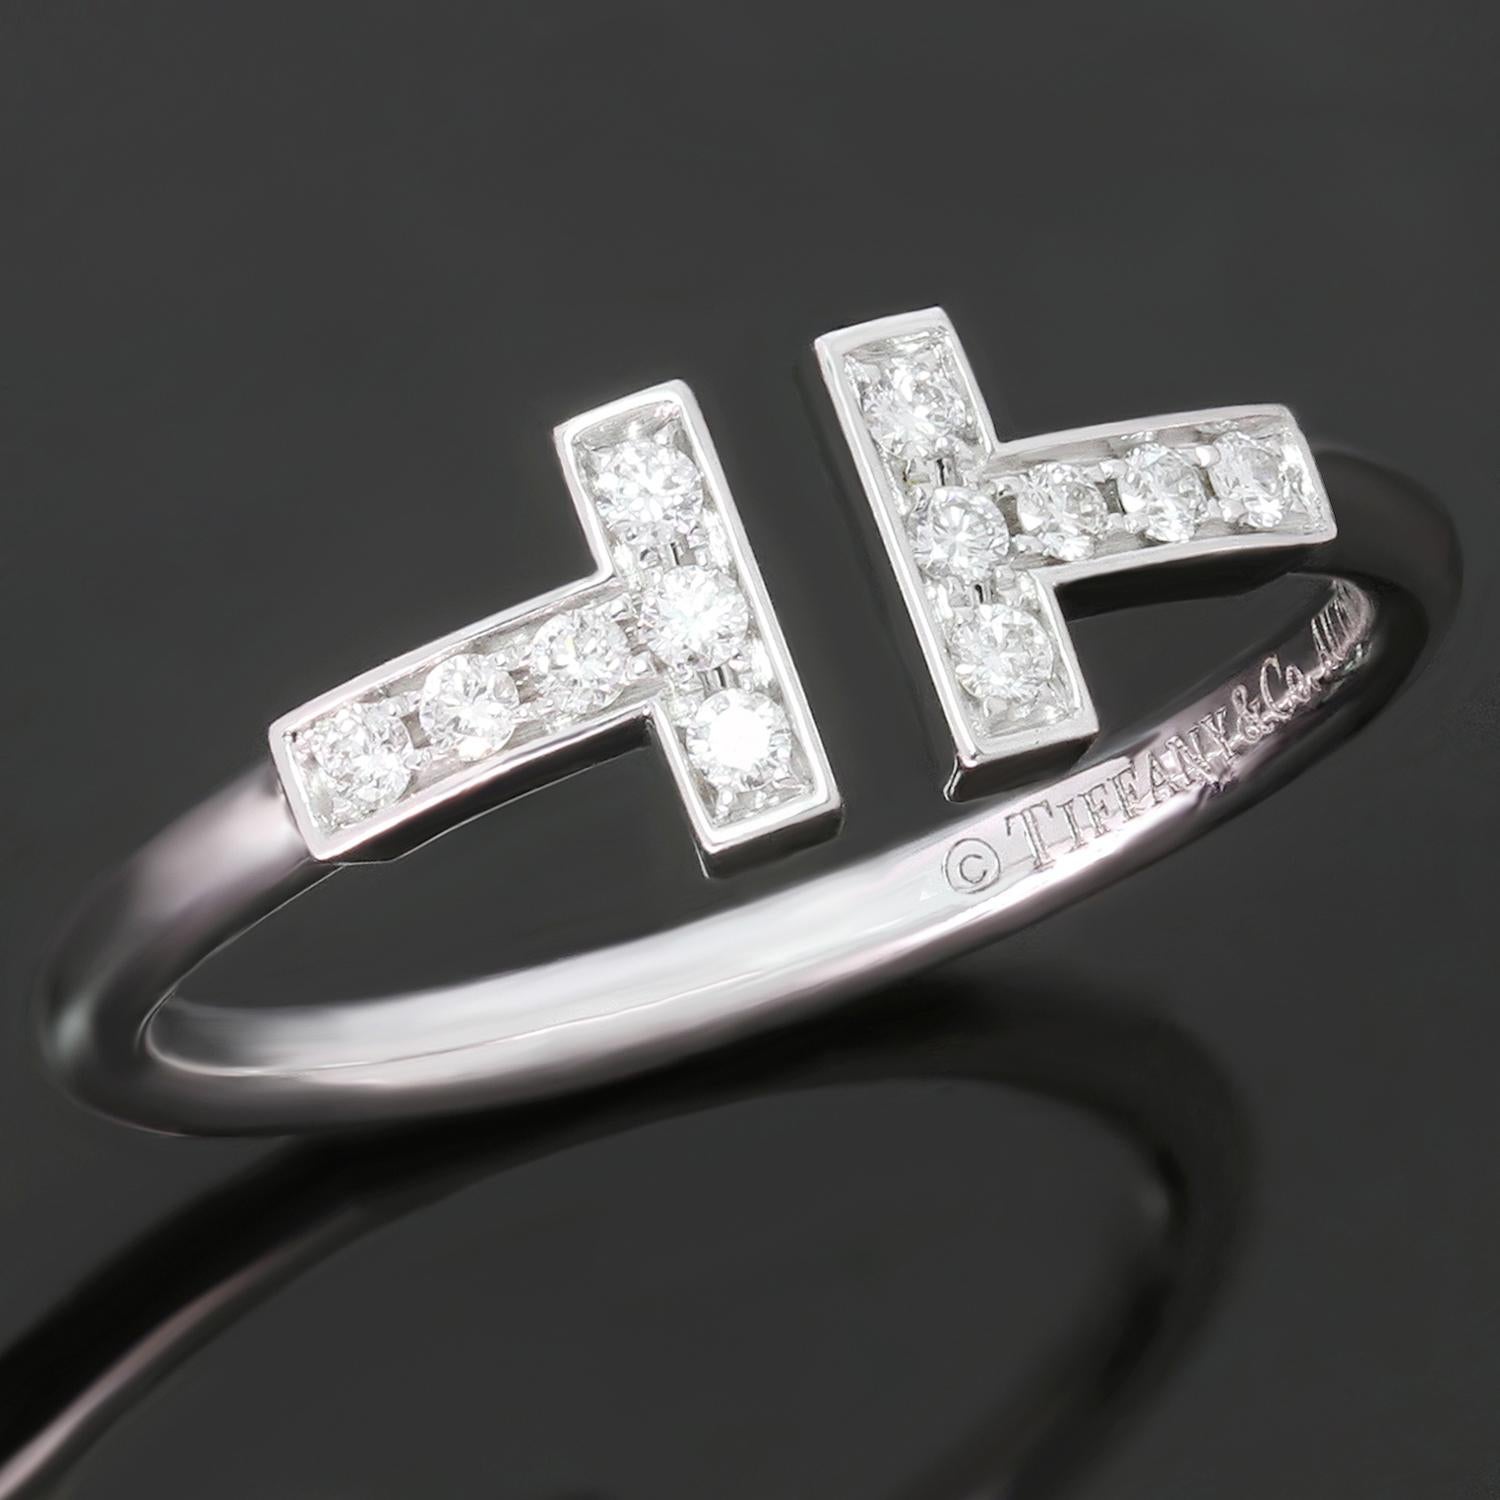 This gorgeous modern Tiffany ring is crafted in 18k white gold and set with brilliant-cut round diamonds. The Tiffany T Wire collection features graphic angles, clean lines, and dazzling diamonds accentuating the ring's bold and timeless form. Made